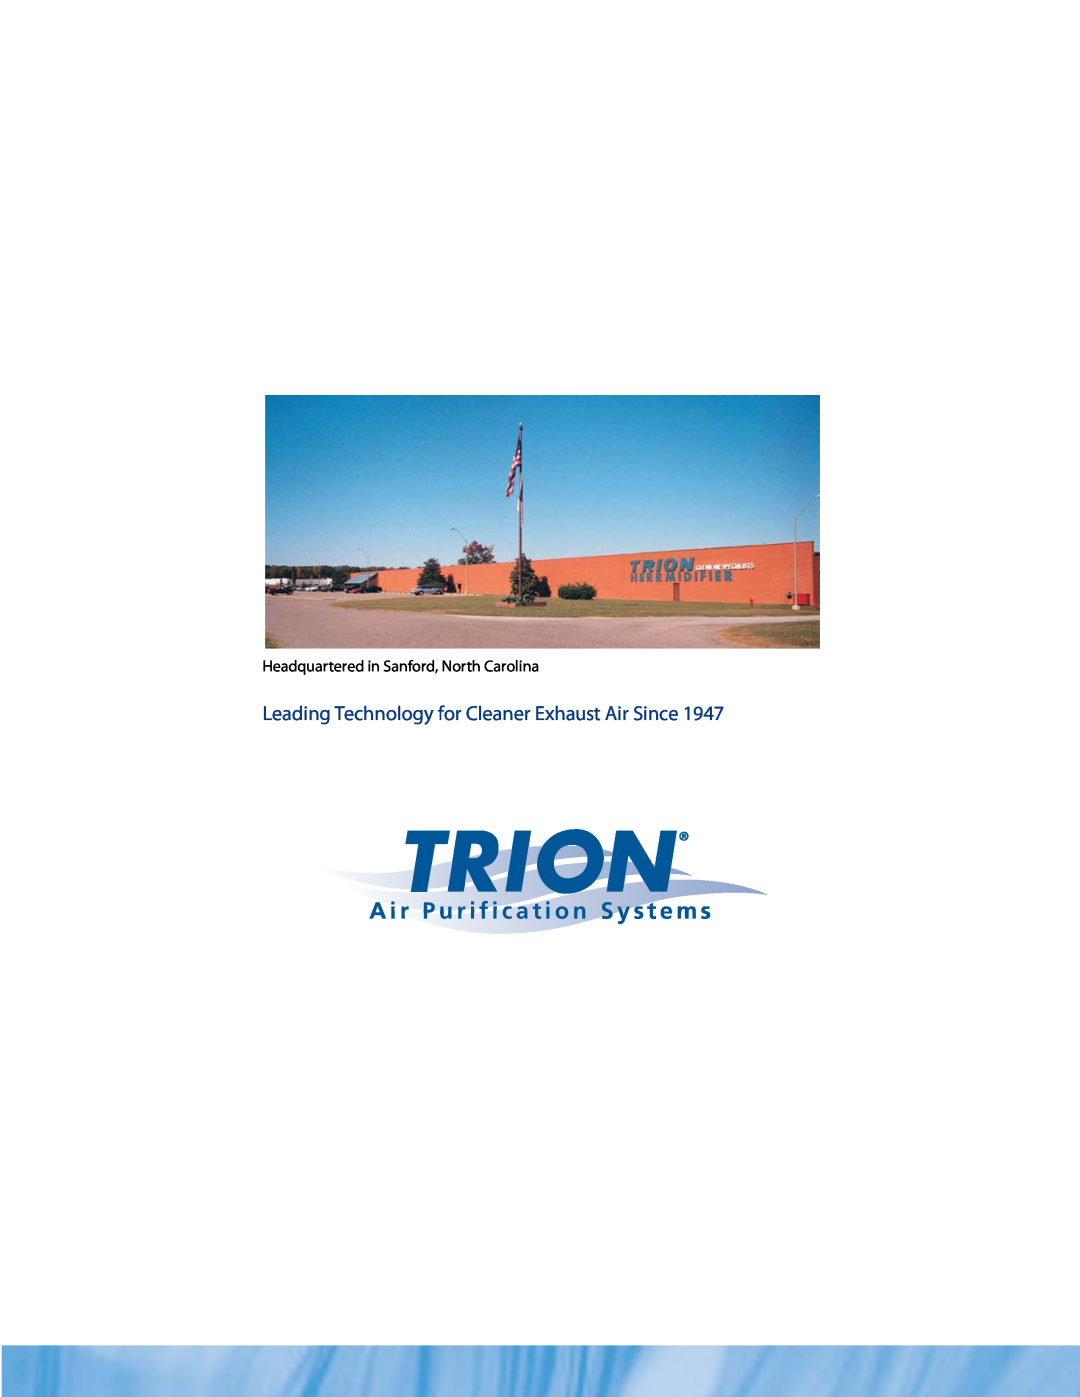 Trion Port-A-Cart manual A i r P u r i f i c a t i o n S y s t e m s, Leading Technology for Cleaner Exhaust Air Since 